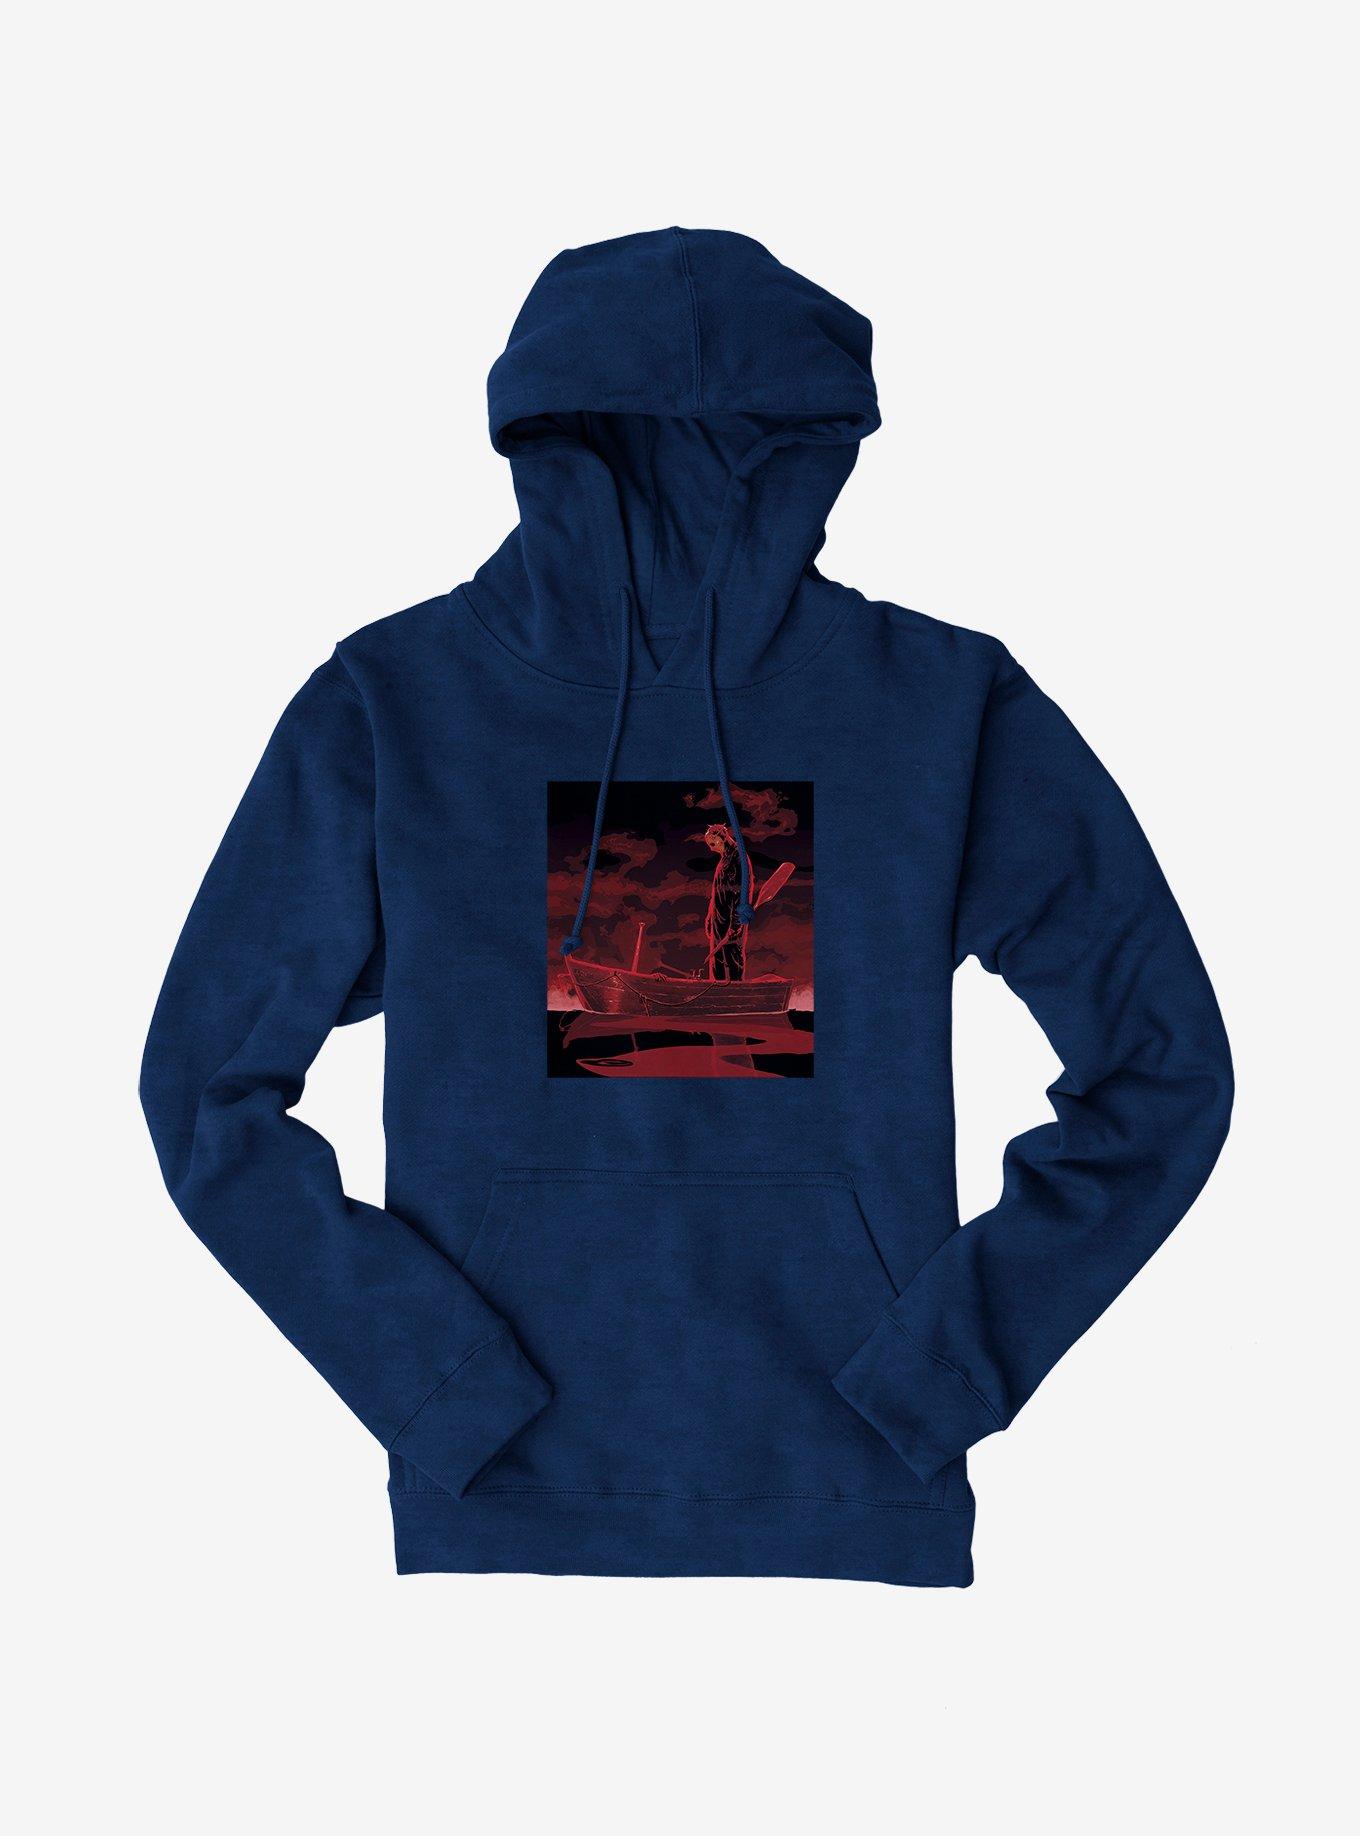 Friday The 13th Jason Boat Hoodie, NAVY, hi-res